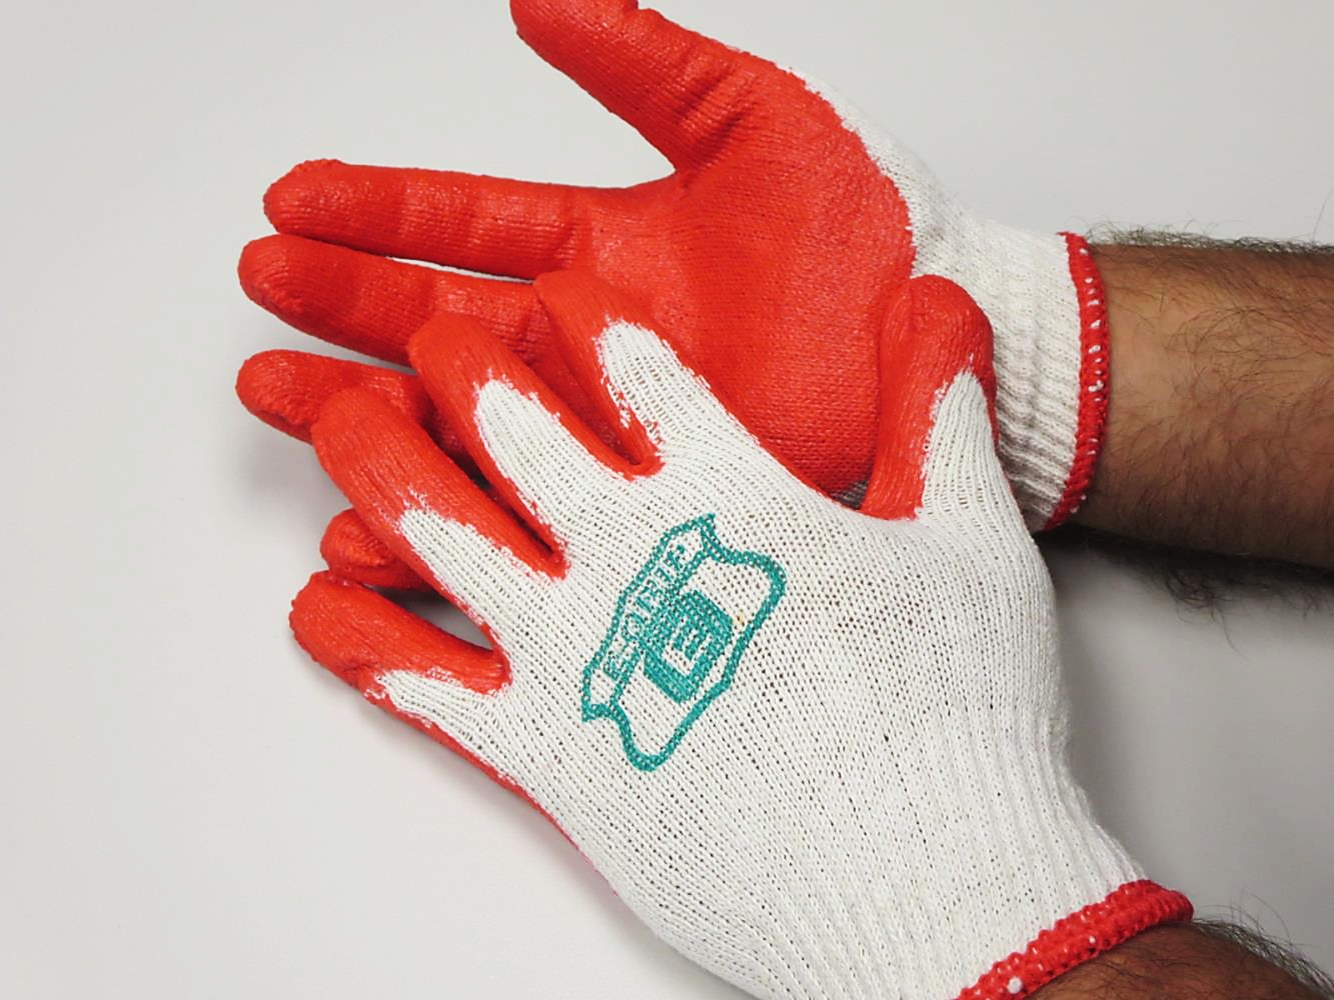 Emerald PPP Red Latex Coated String Knit Gloves